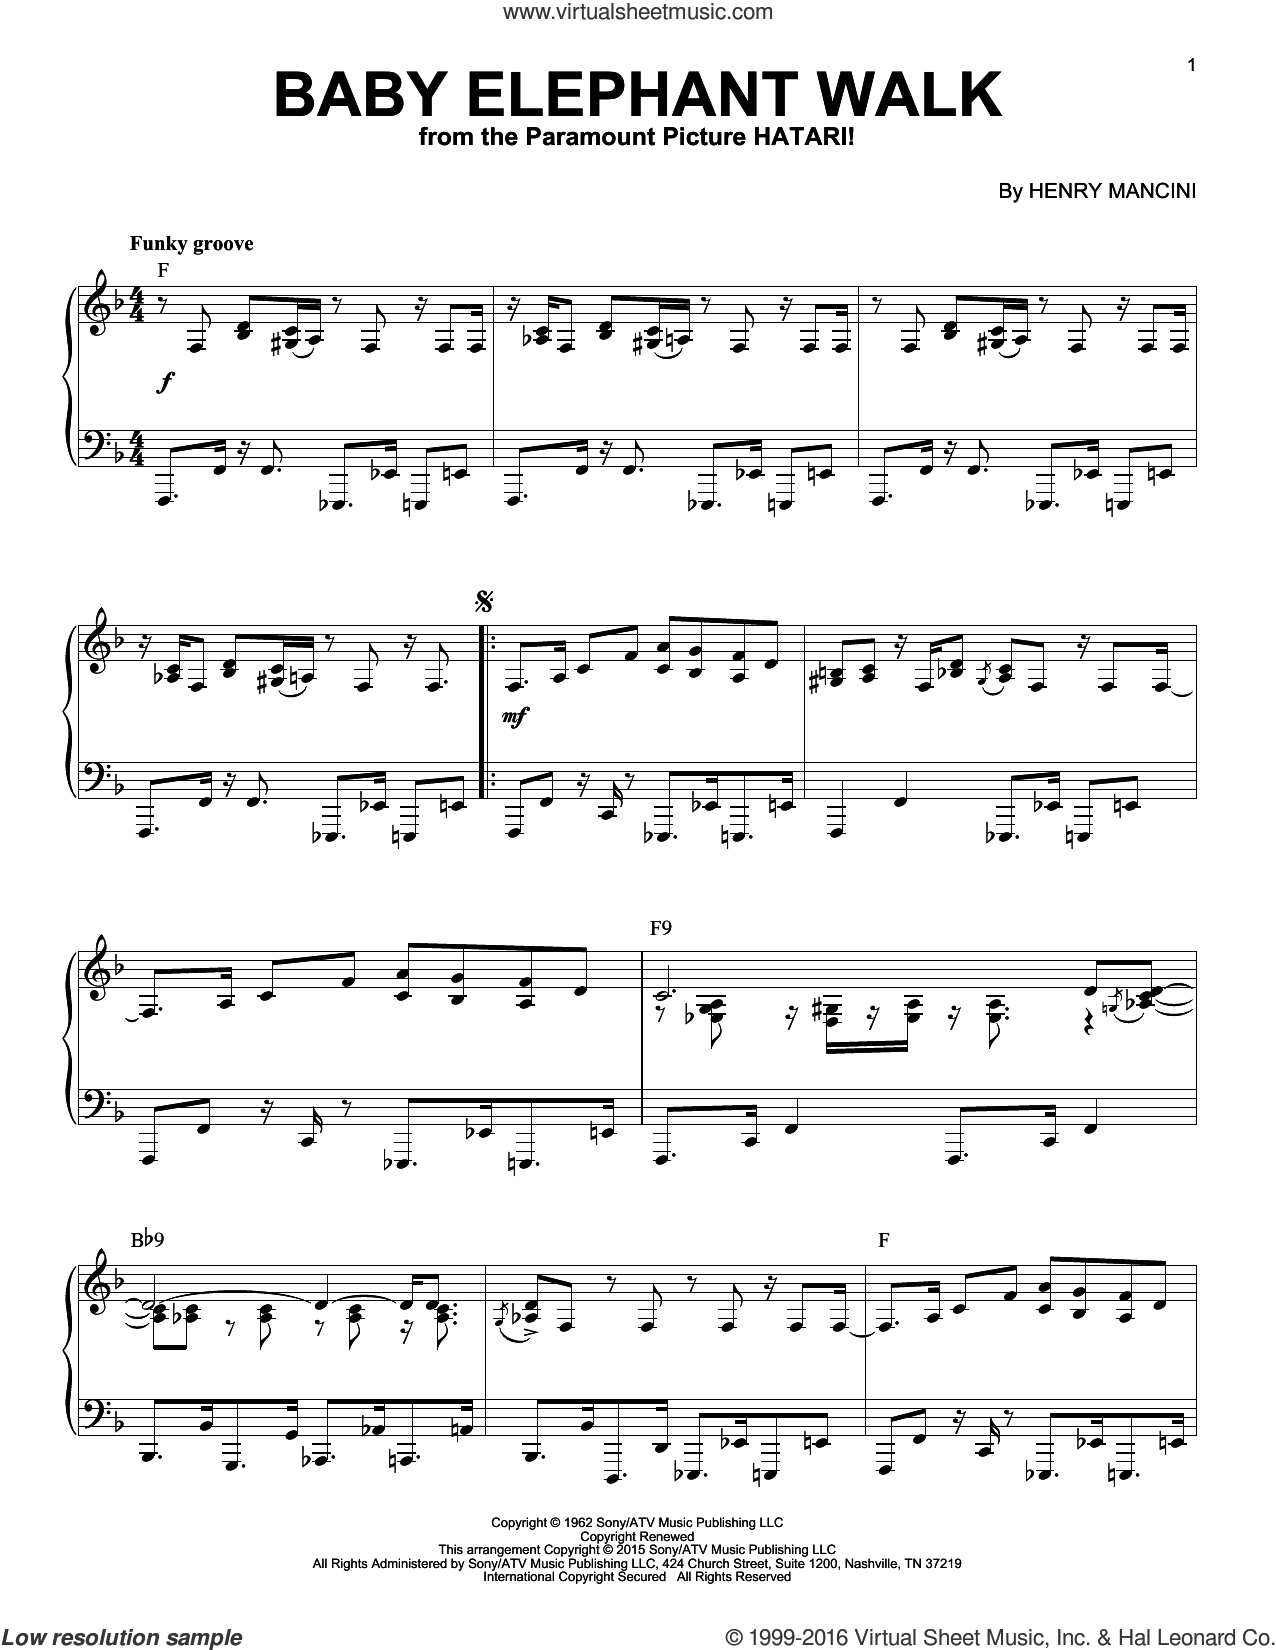 Walk Him Up the Stairs Sheet Music - 1 Arrangement Available